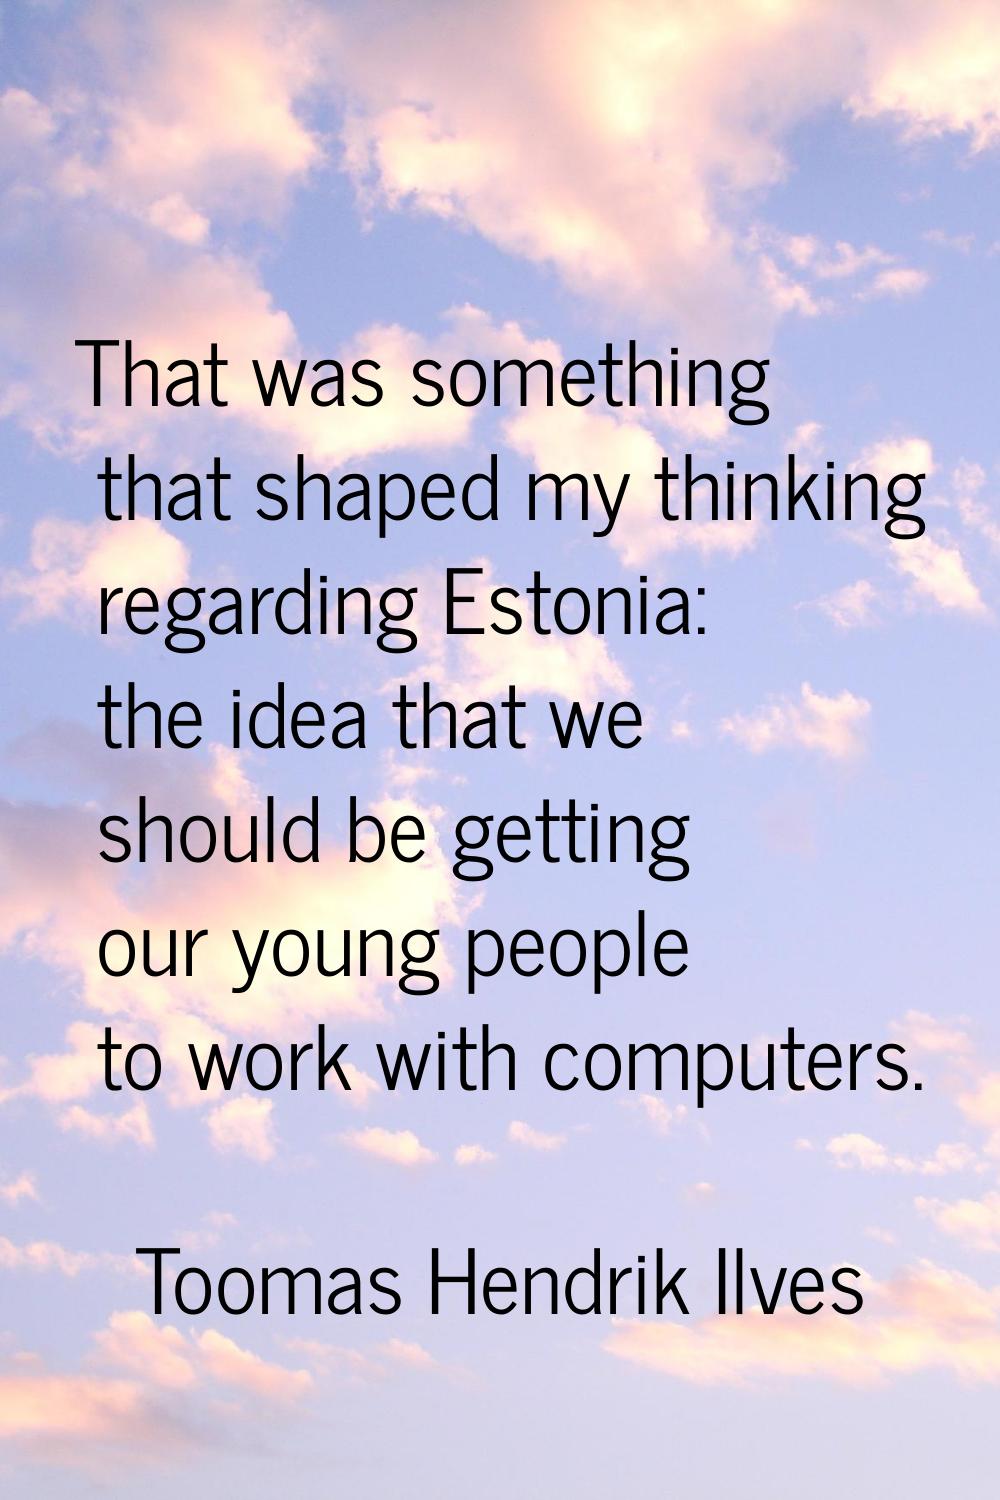 That was something that shaped my thinking regarding Estonia: the idea that we should be getting ou